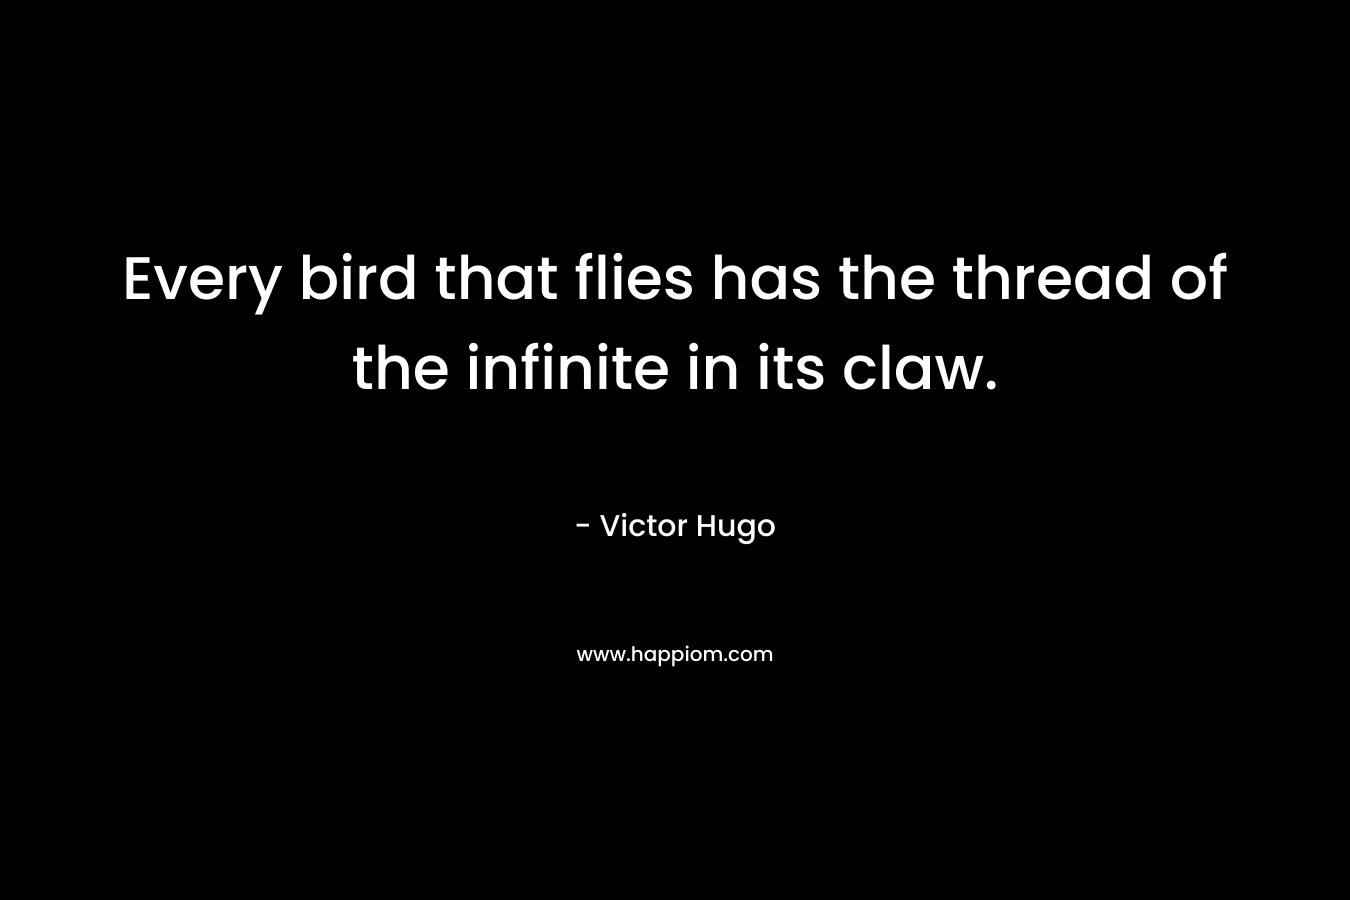 Every bird that flies has the thread of the infinite in its claw.